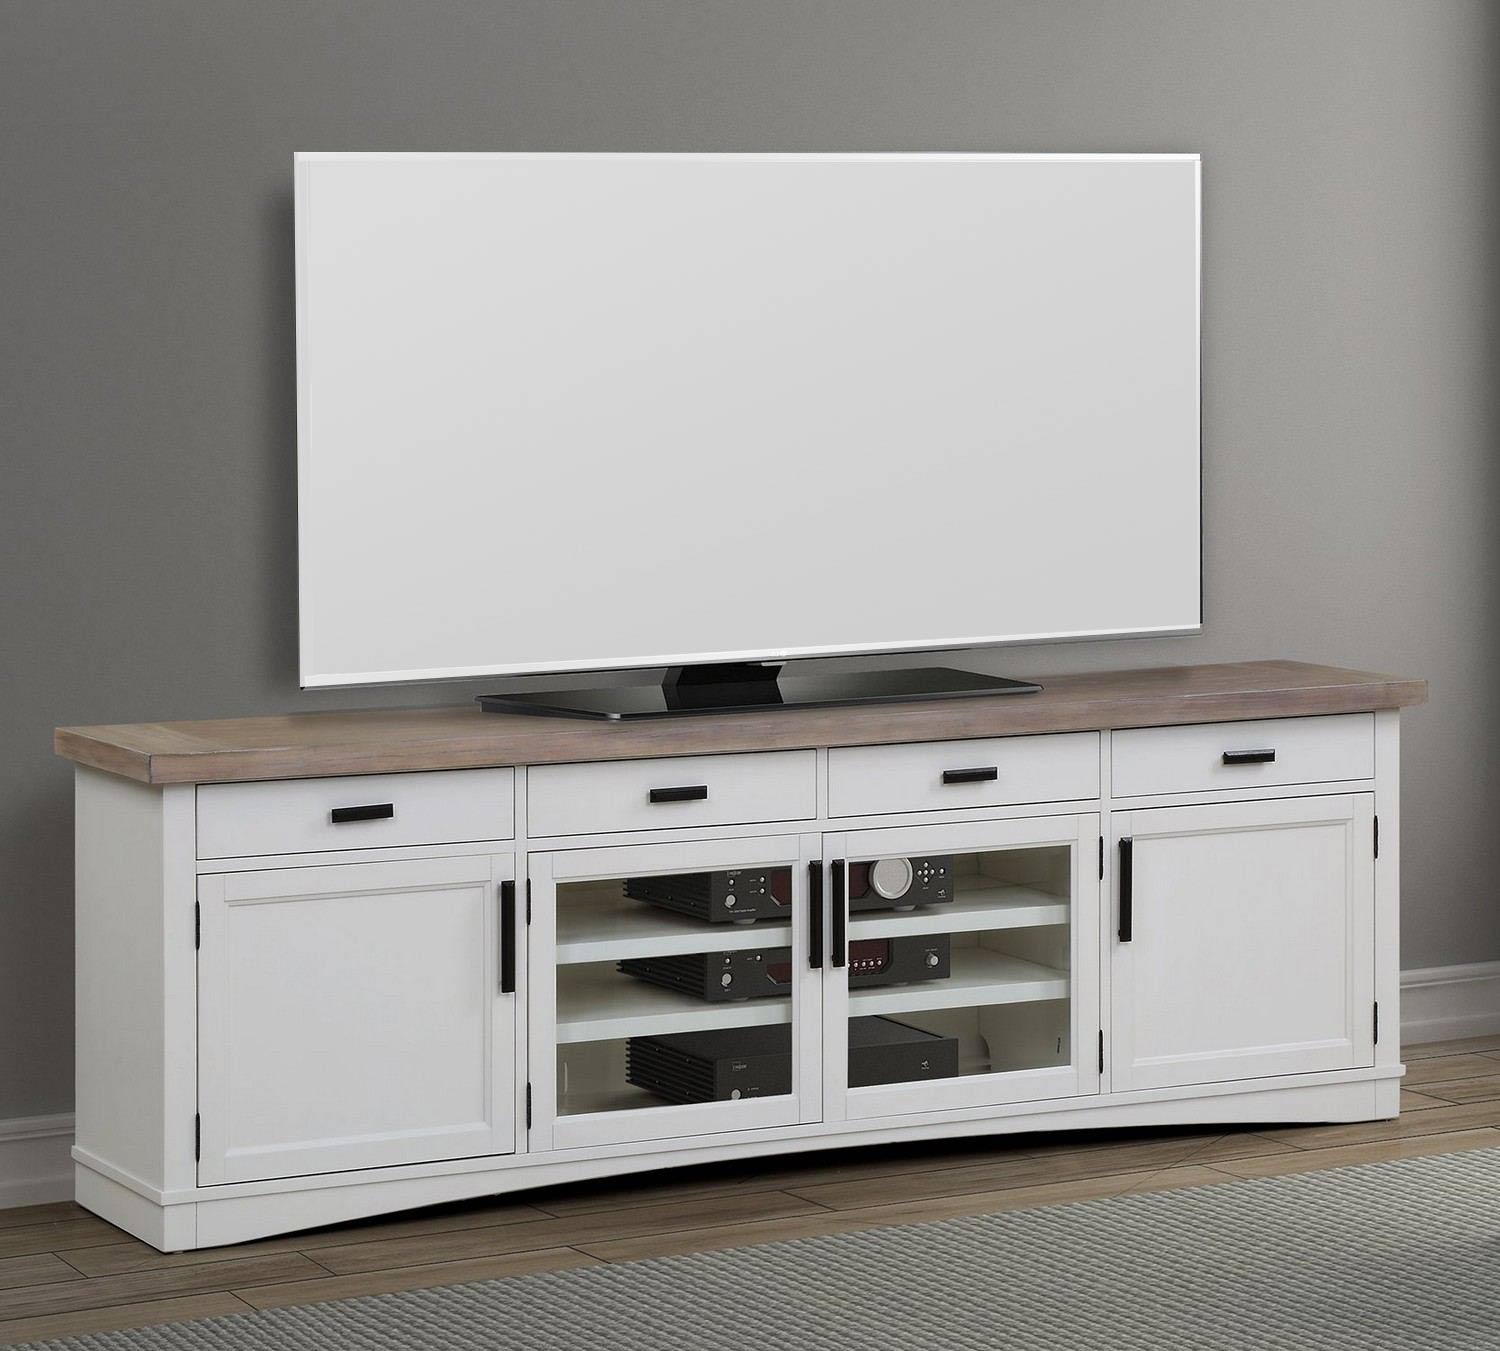 Parker House Americana Modern 92 Inch TV Console - Cotton with Weathered Natural top